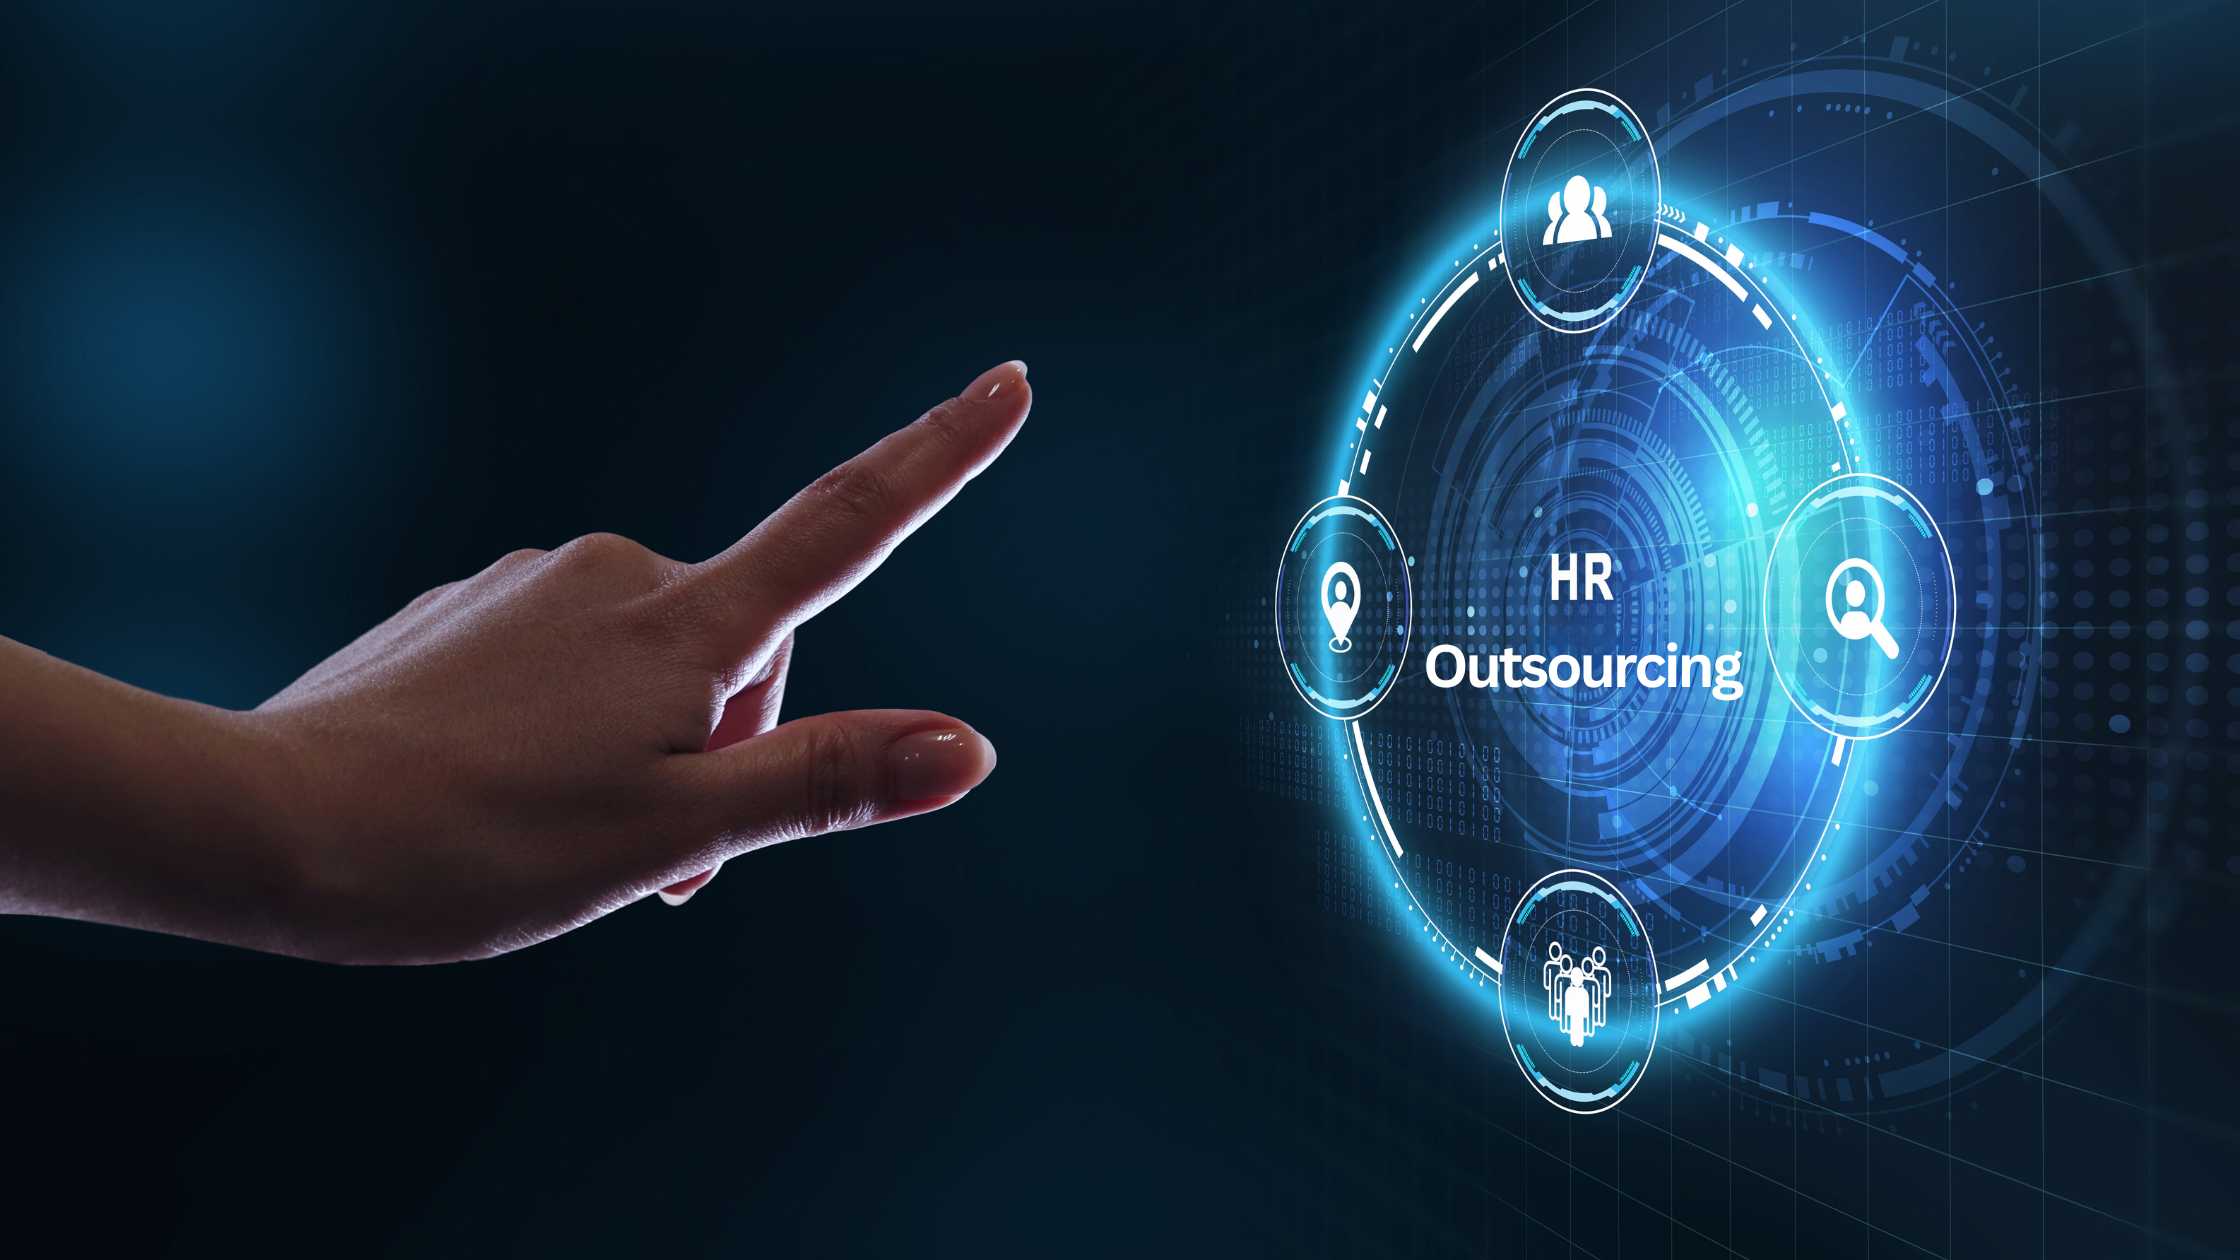 HR Outsourcing to improve Business Efficiency